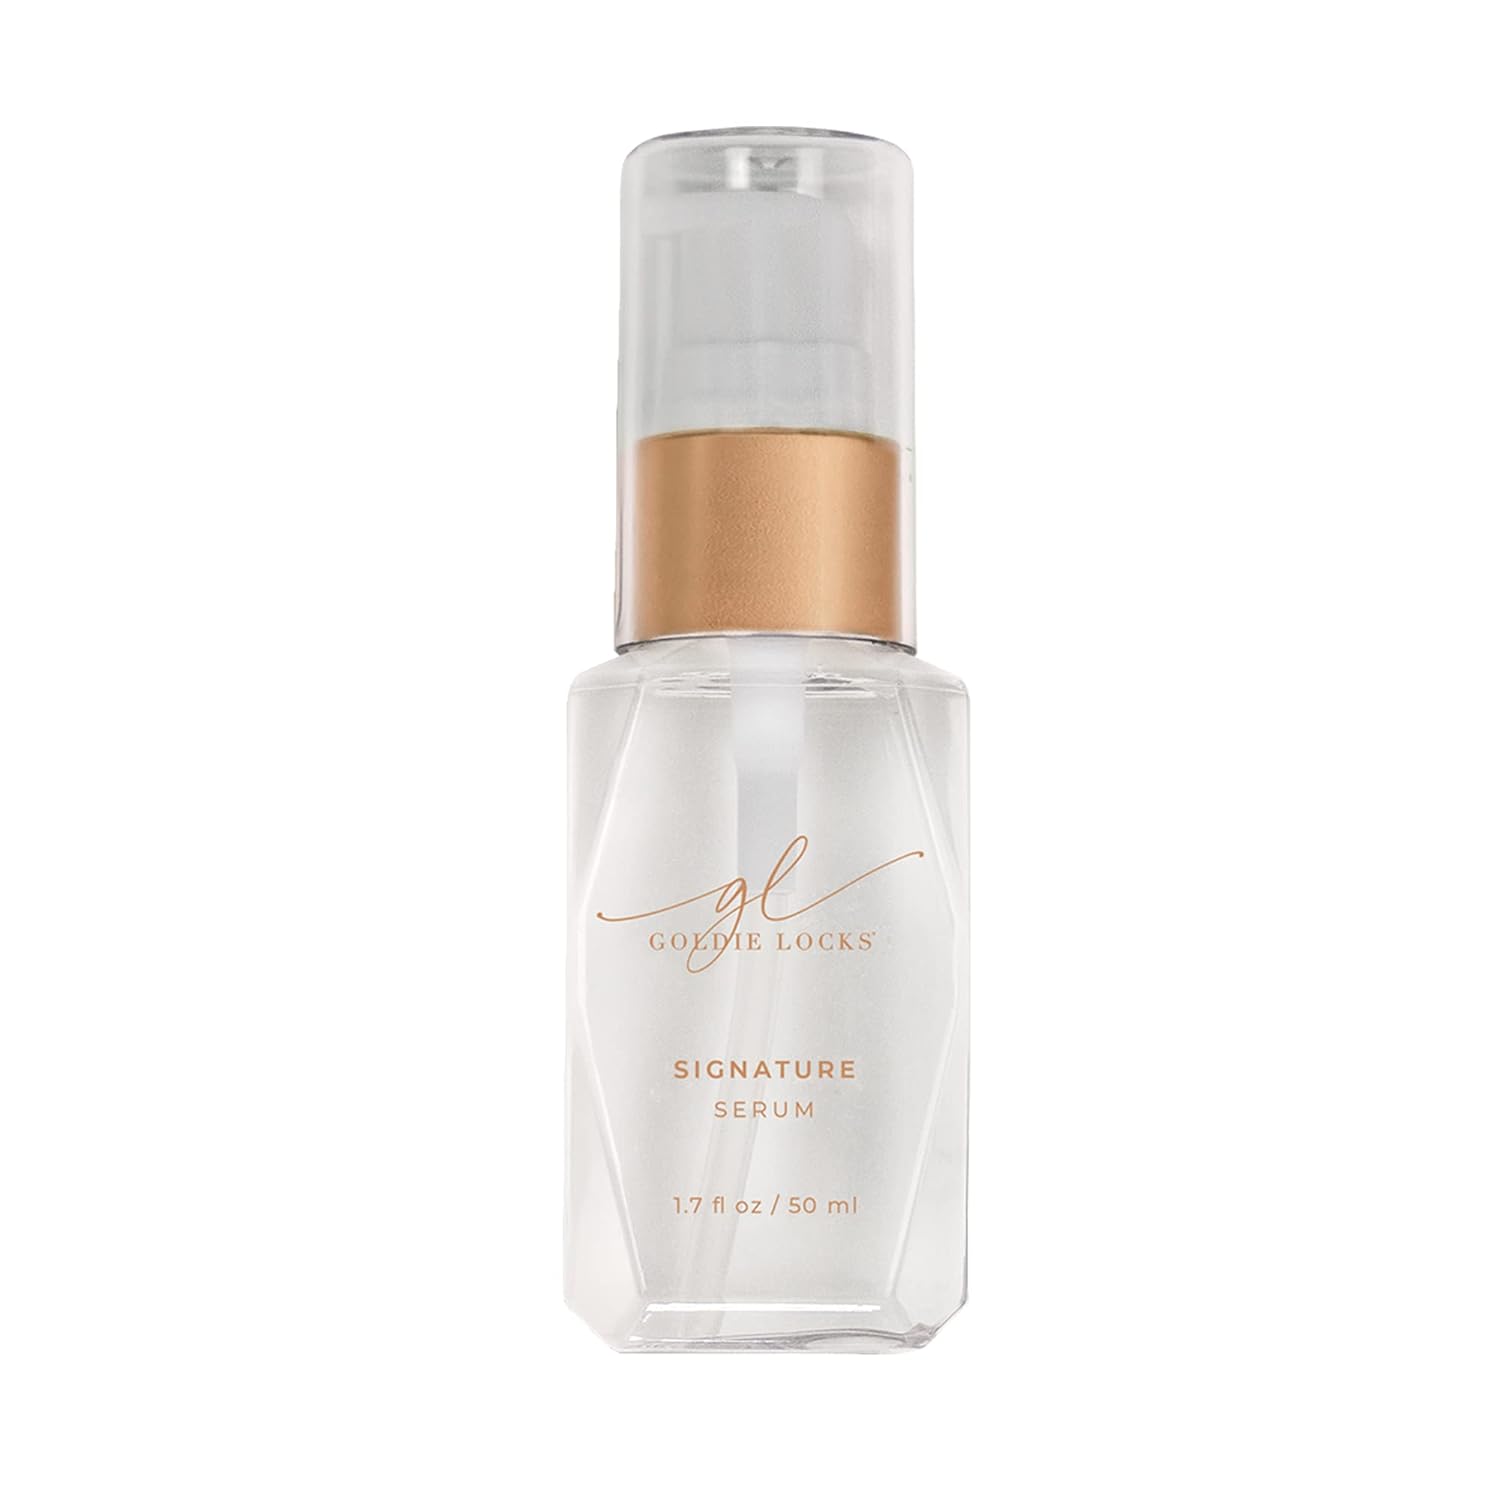 goldie locks signature serum, one of the best serums for dry hair